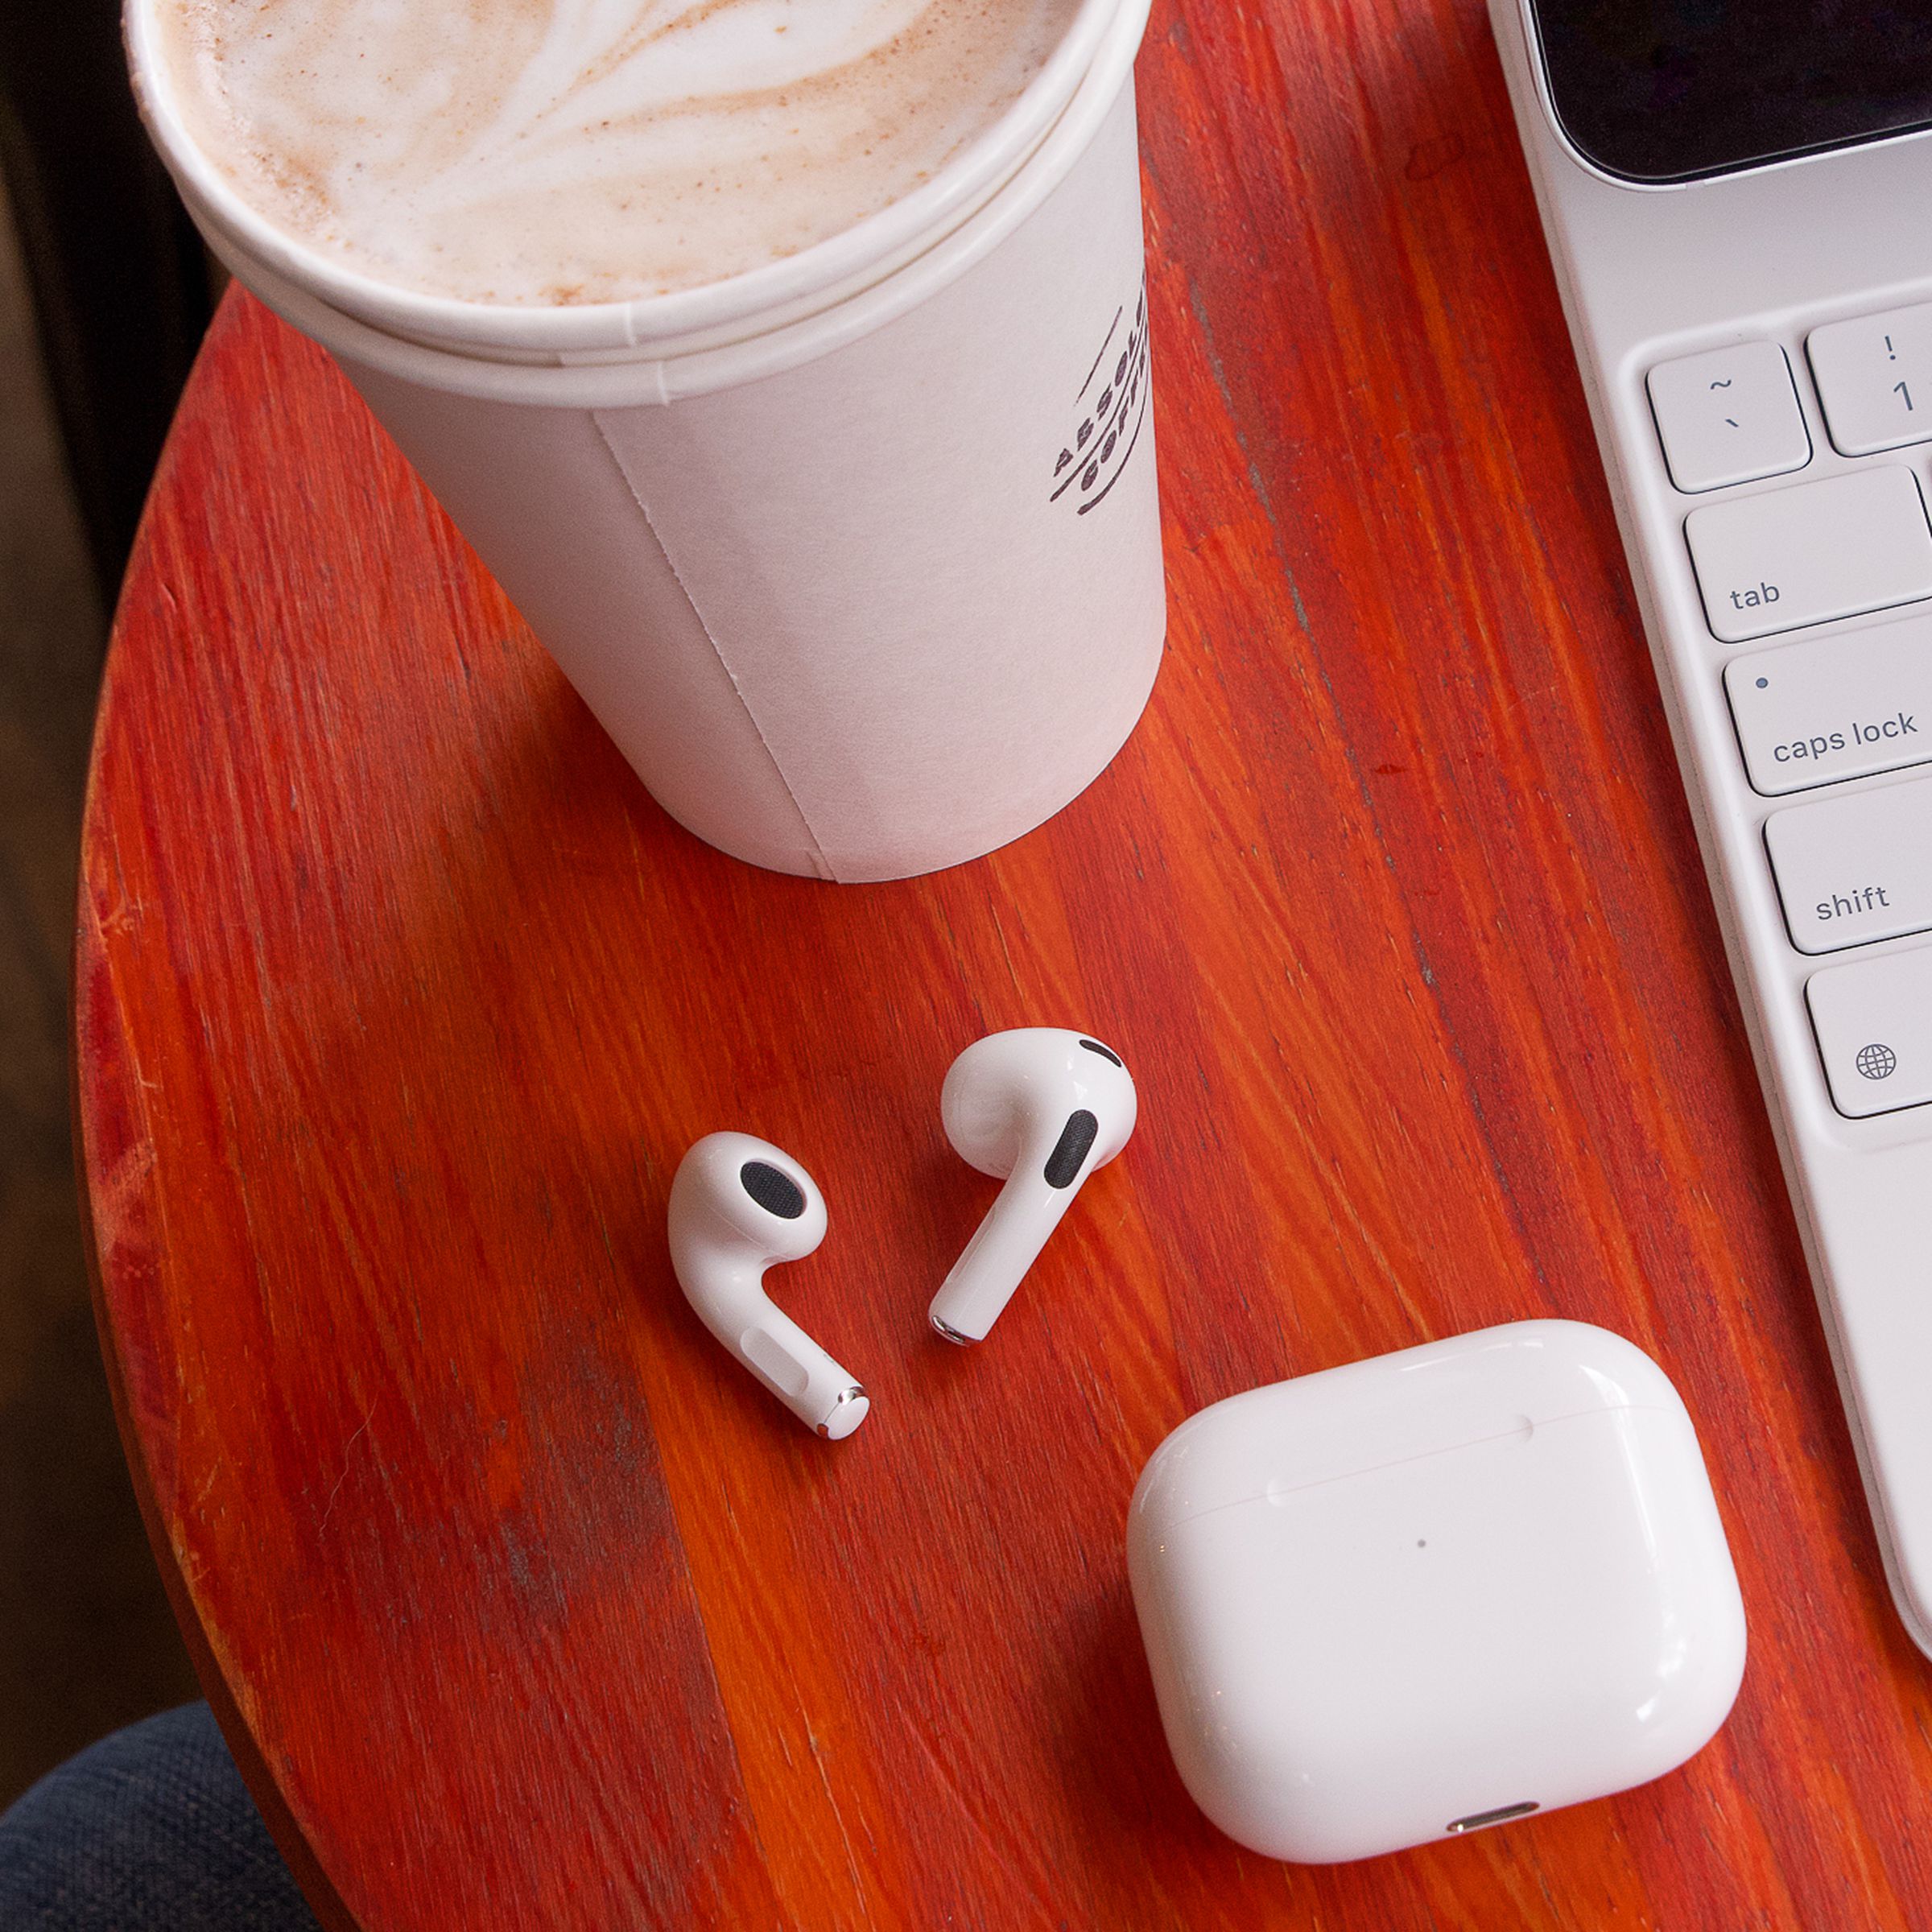 An image of Apple’s AirPods on a table beside a cup of coffee.